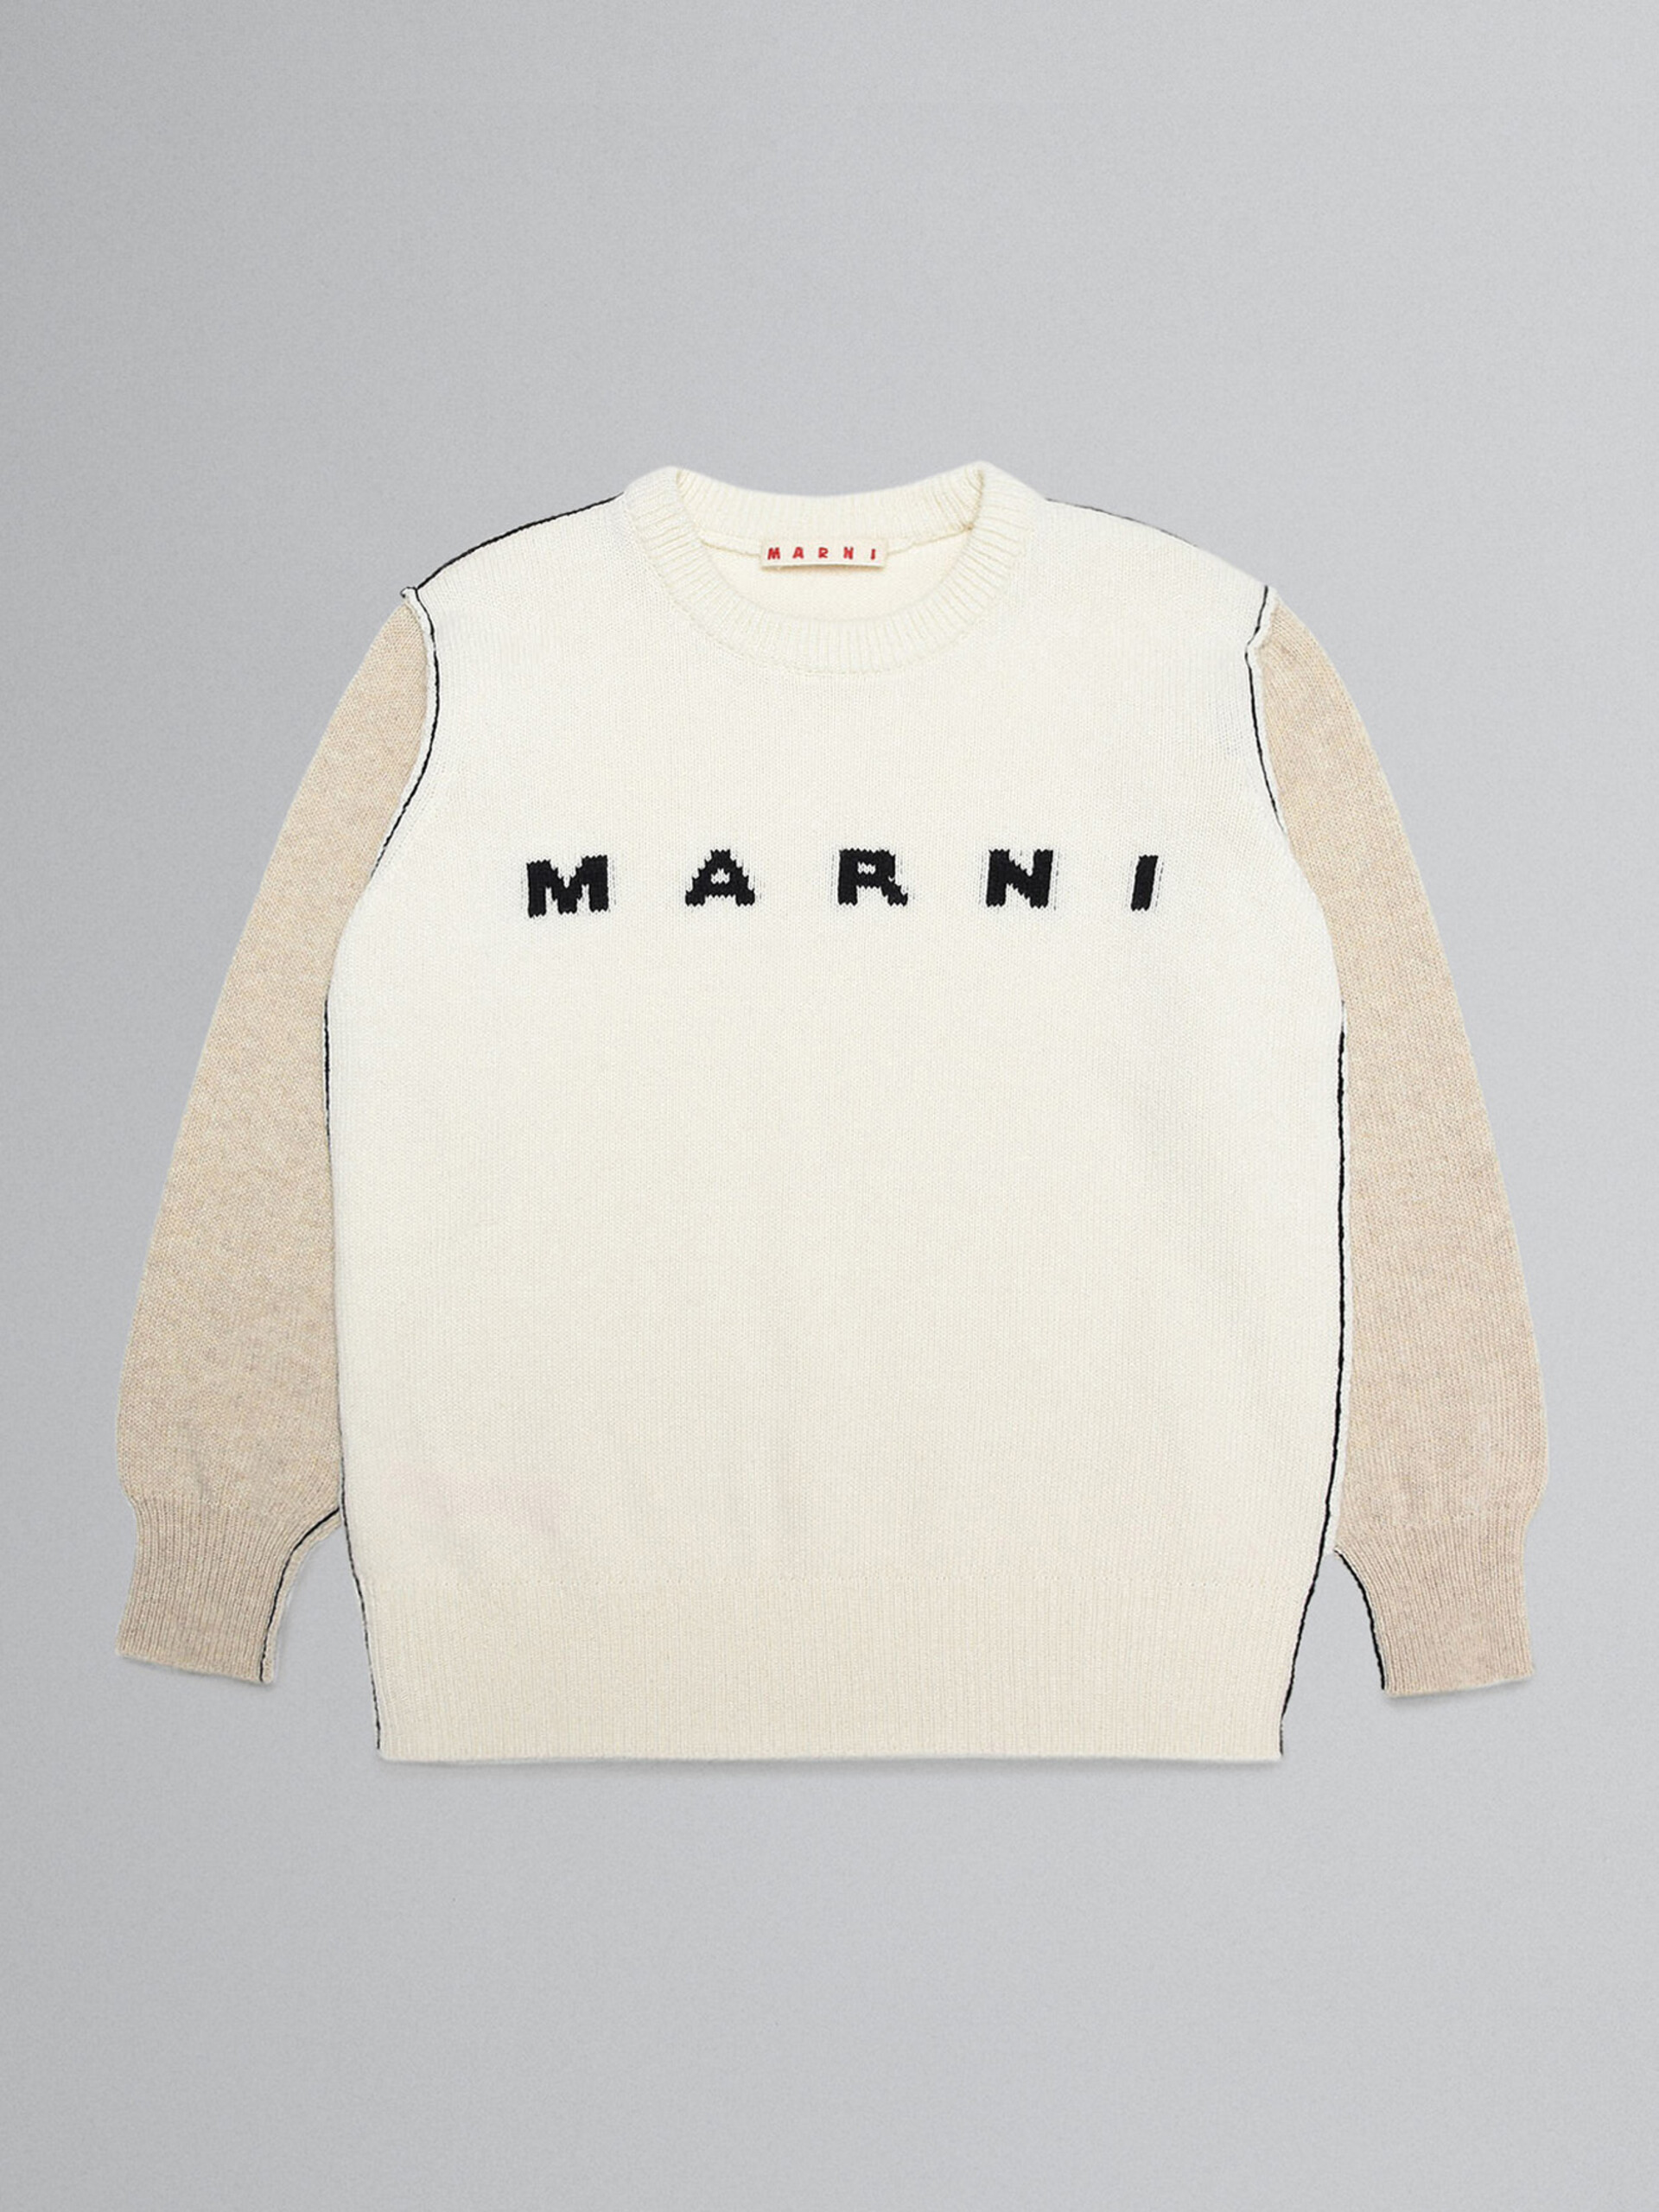 Milky white knitted sweater with "Marni" intarsia - Knitwear - Image 1